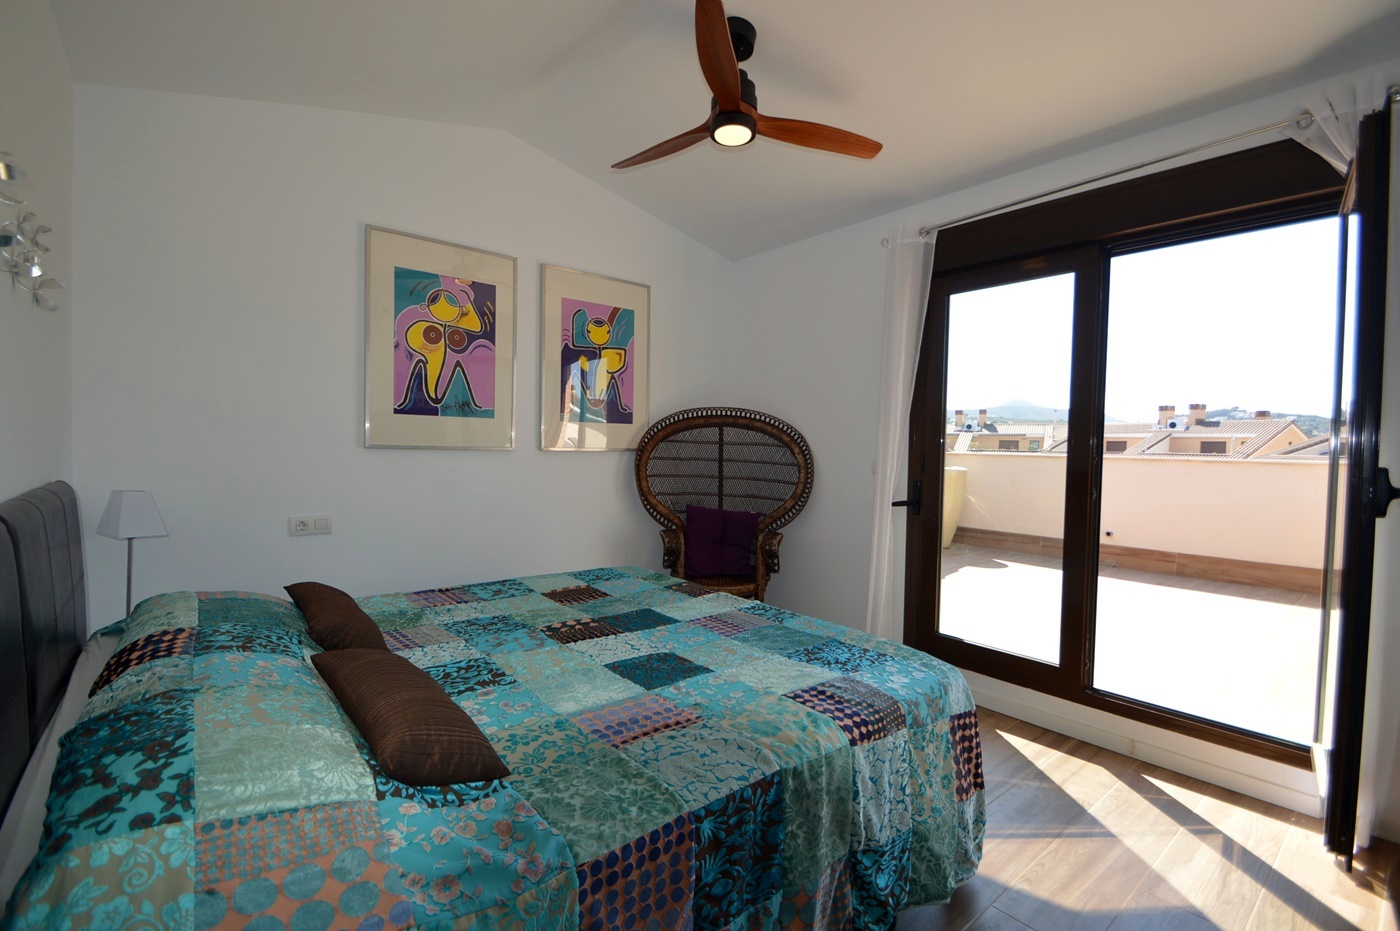 Duplex Penthouse Brisas del Arenal on the Arenal Beach